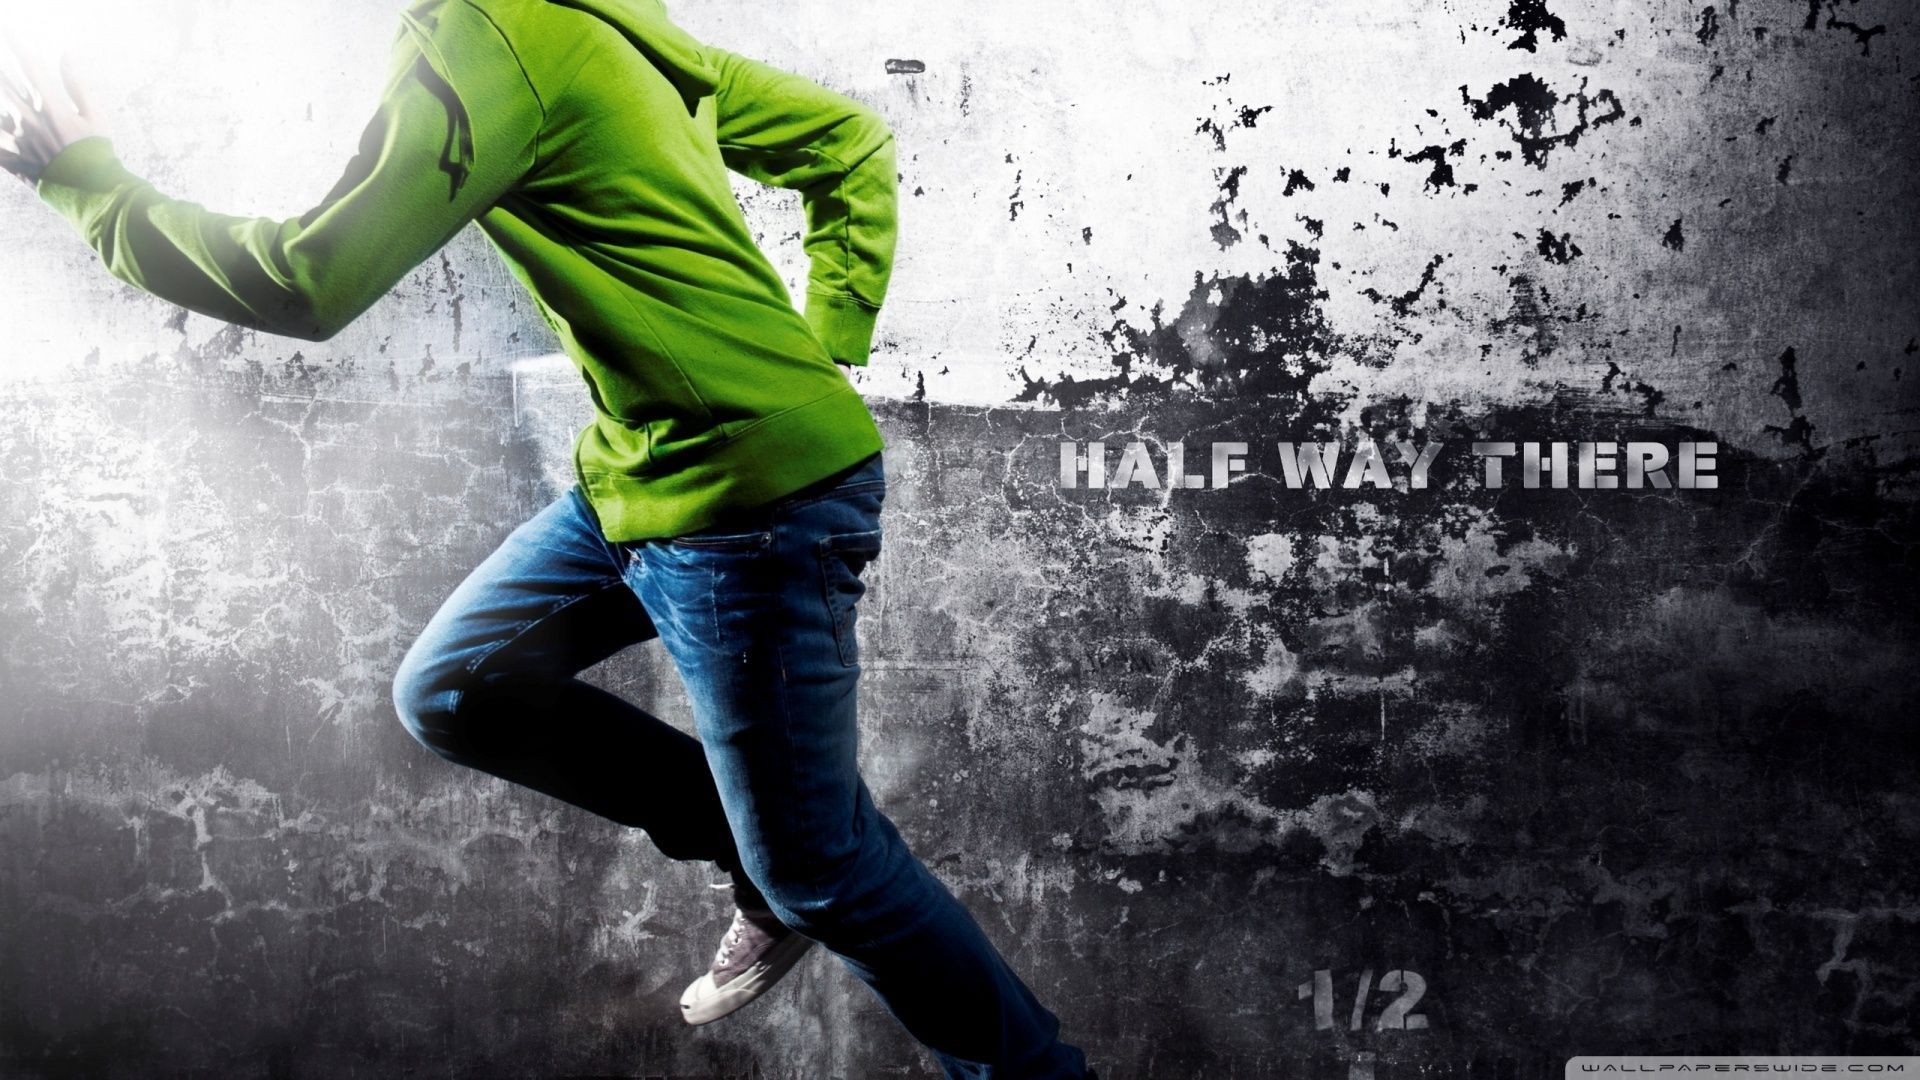 Way of life parkour wallpapers and images - wallpapers, pictures ...